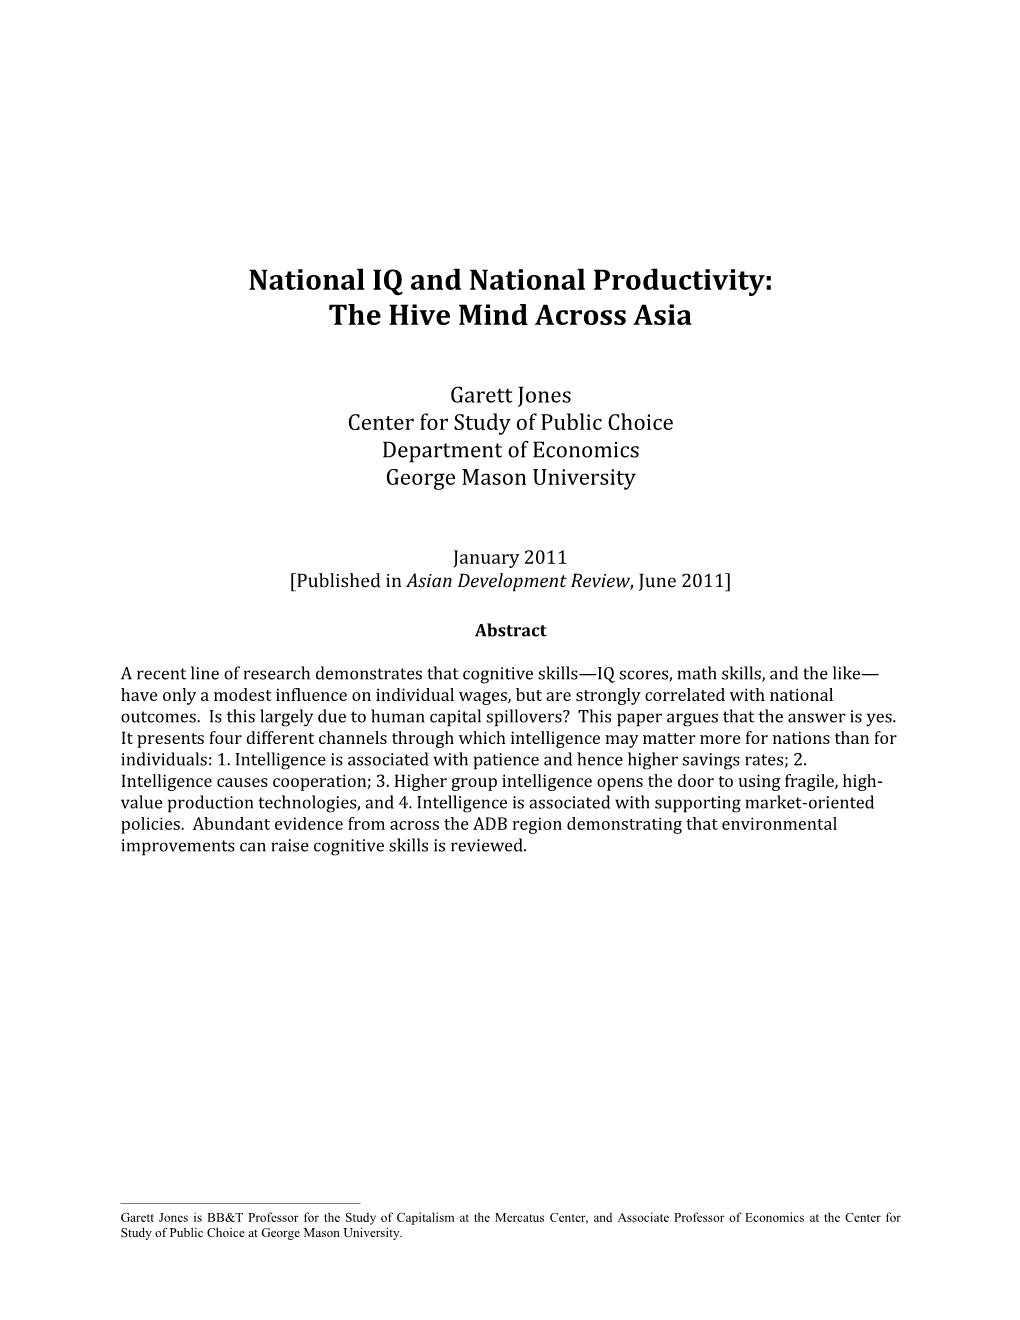 National IQ and National Productivity: the Hive Mind Across Asia